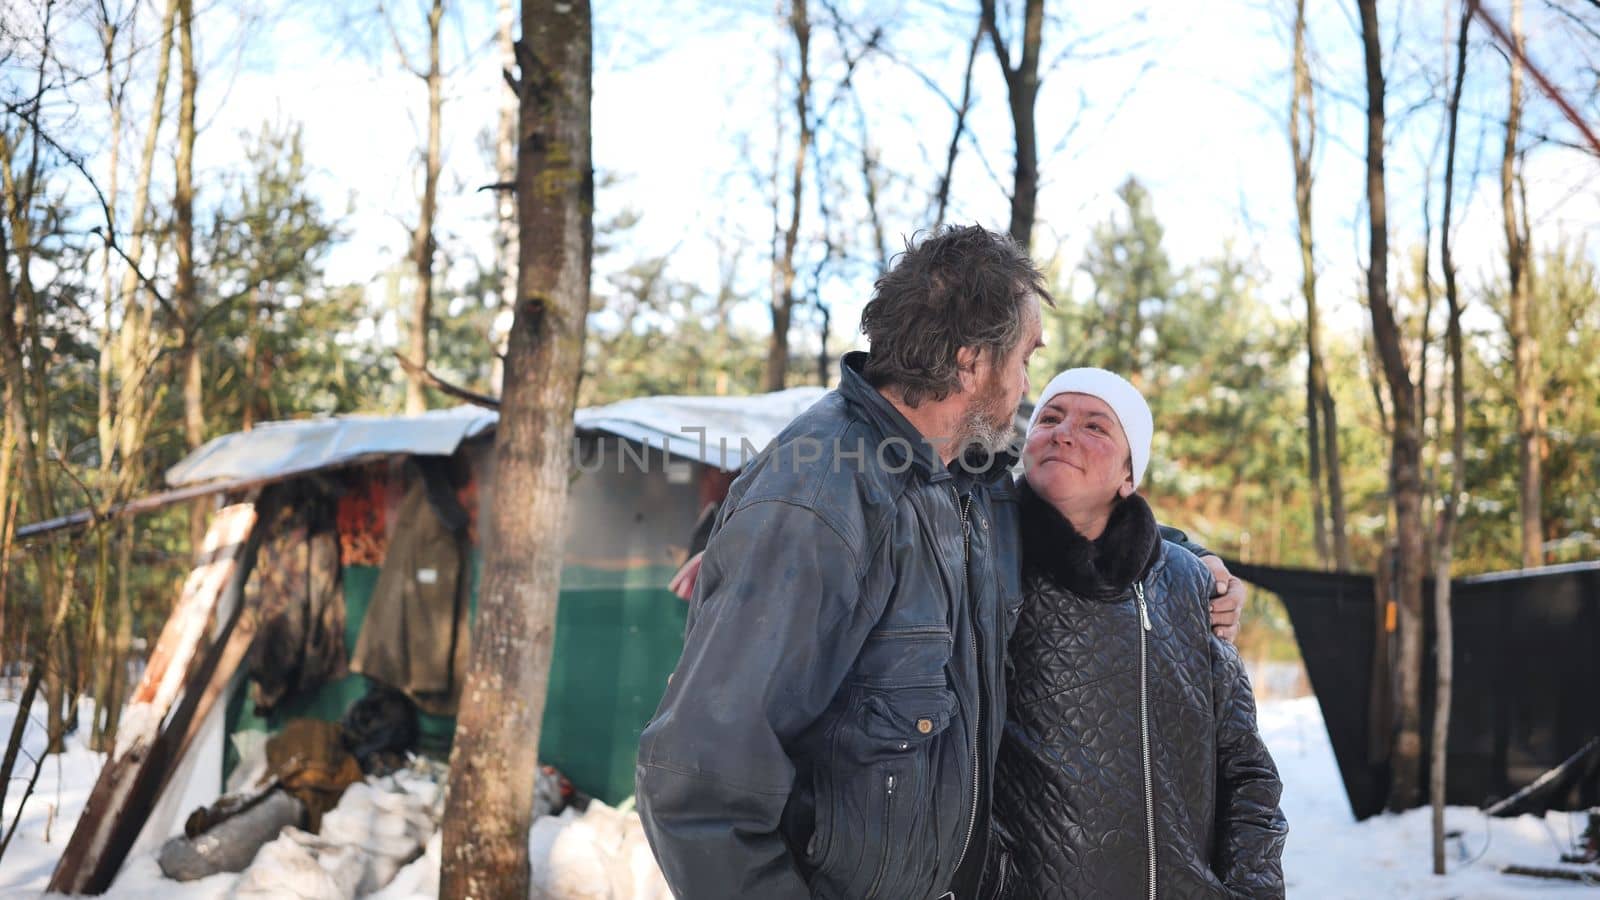 A homeless woman and a man pose in the woods in winter